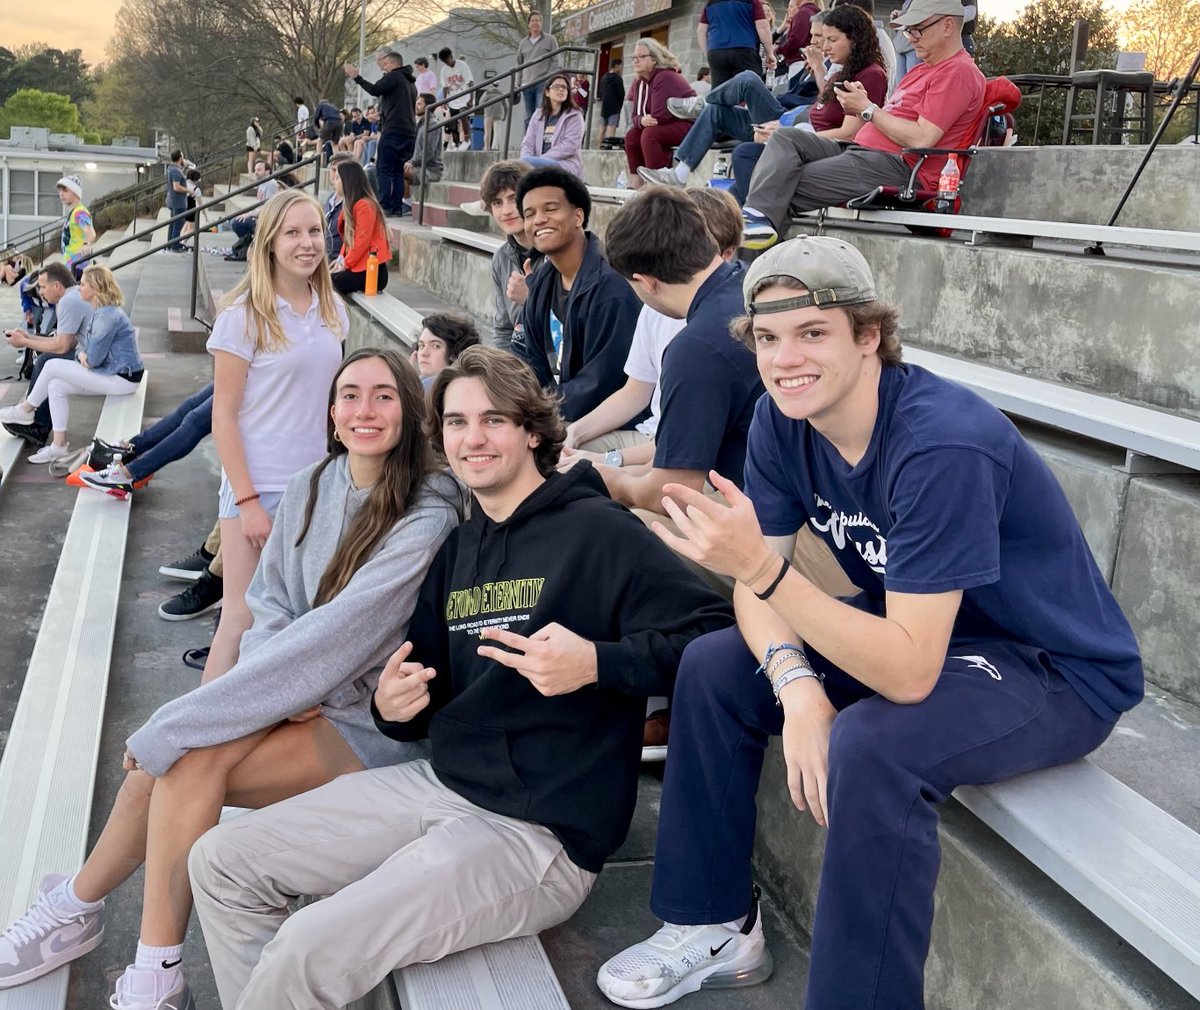 When your fellow band mates come to cheer you on at soccer! #mvpschool #MVArts 💙⚽️💙🎸💙Go mustangs #bettertogether